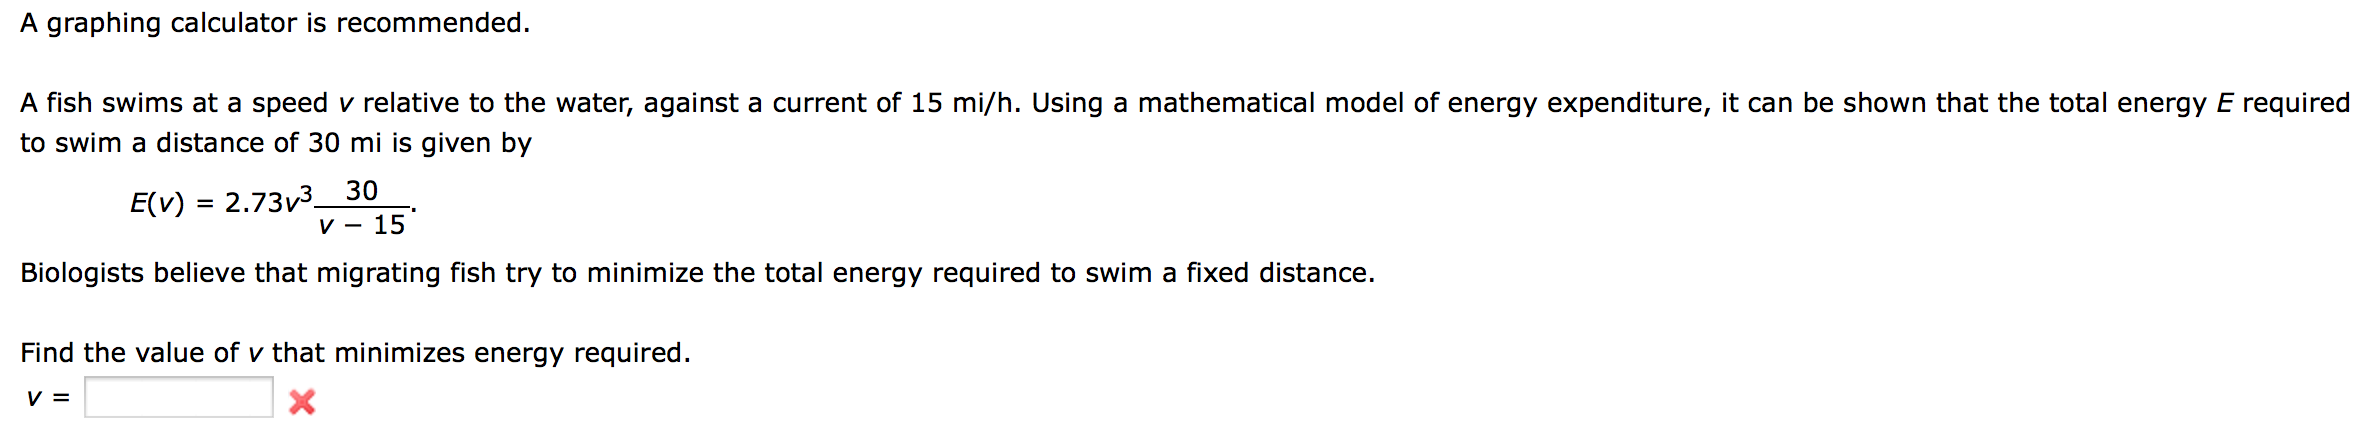 Image for A graphing calculator is recommended. A fish swims at a speed y relative to the water, against a current of 15